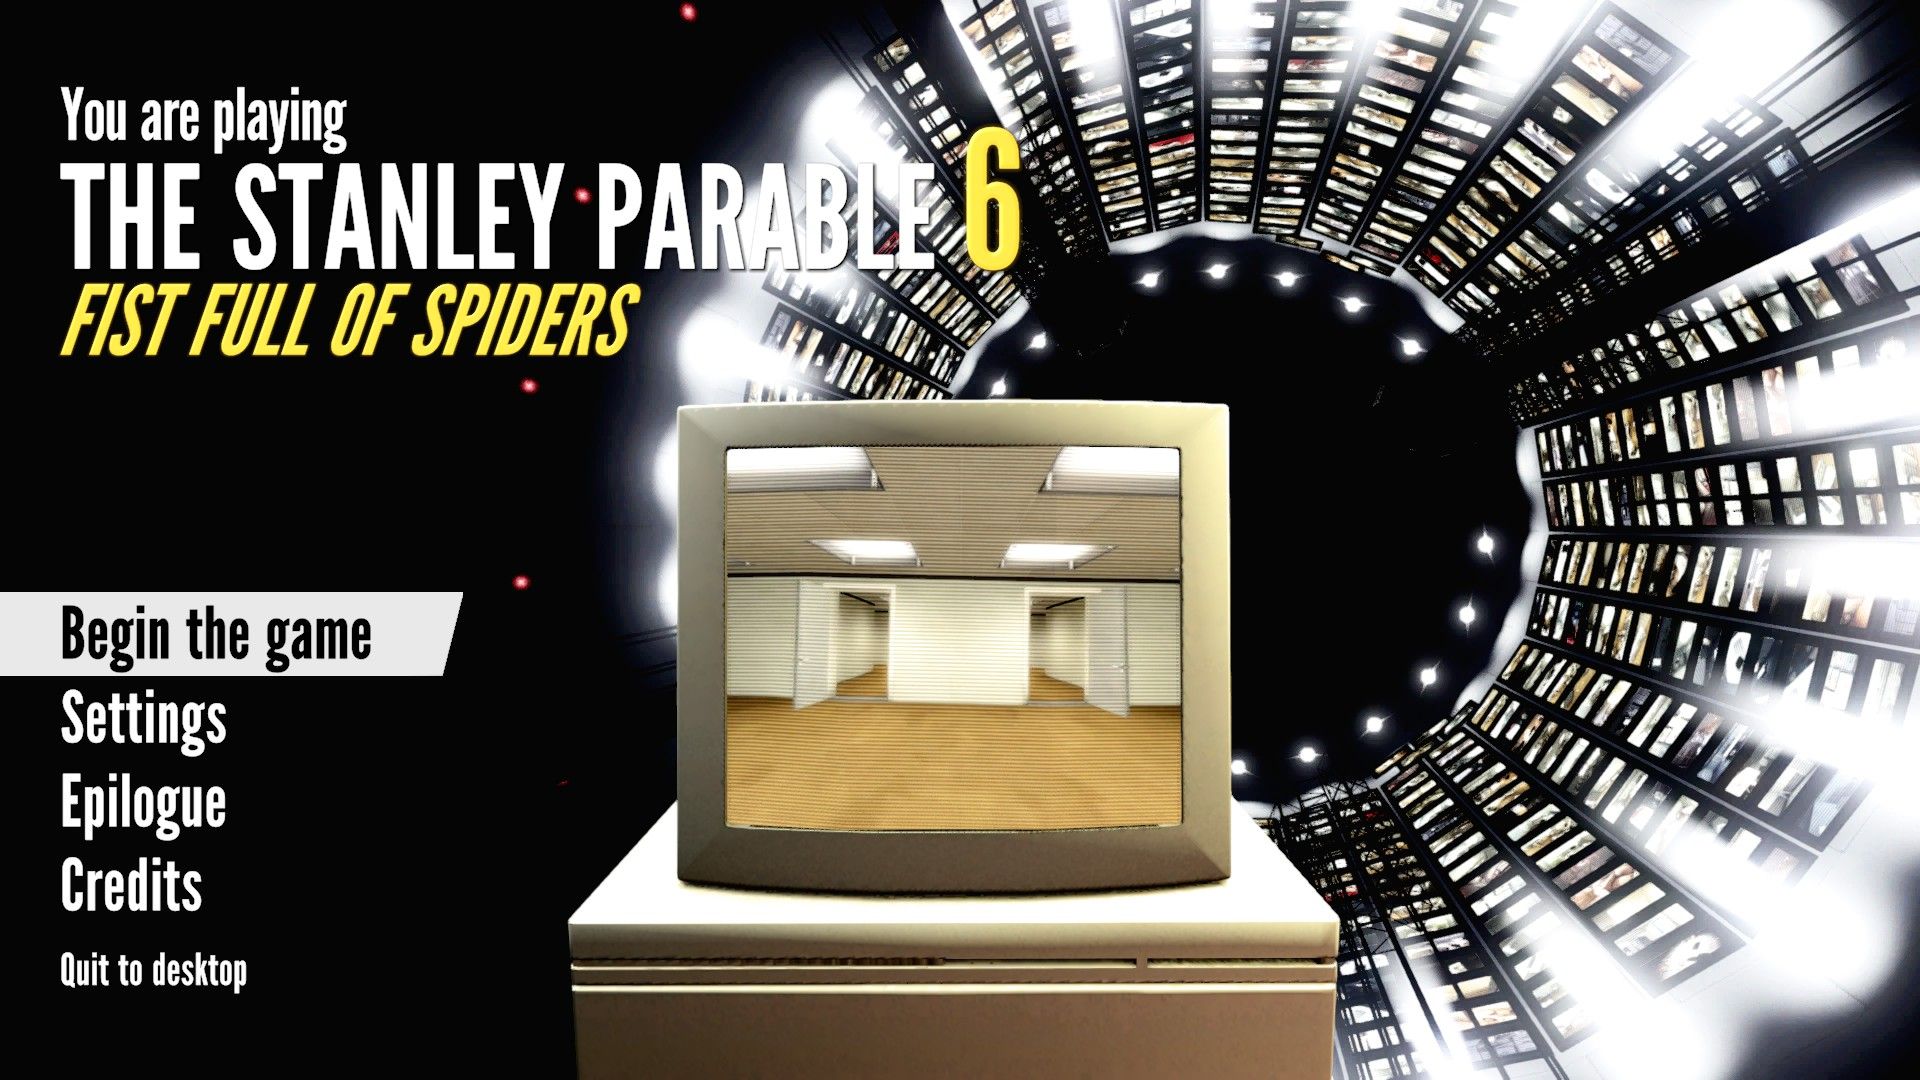 Скриншот из The Stanley Parable 6: Fist Full of Spiders